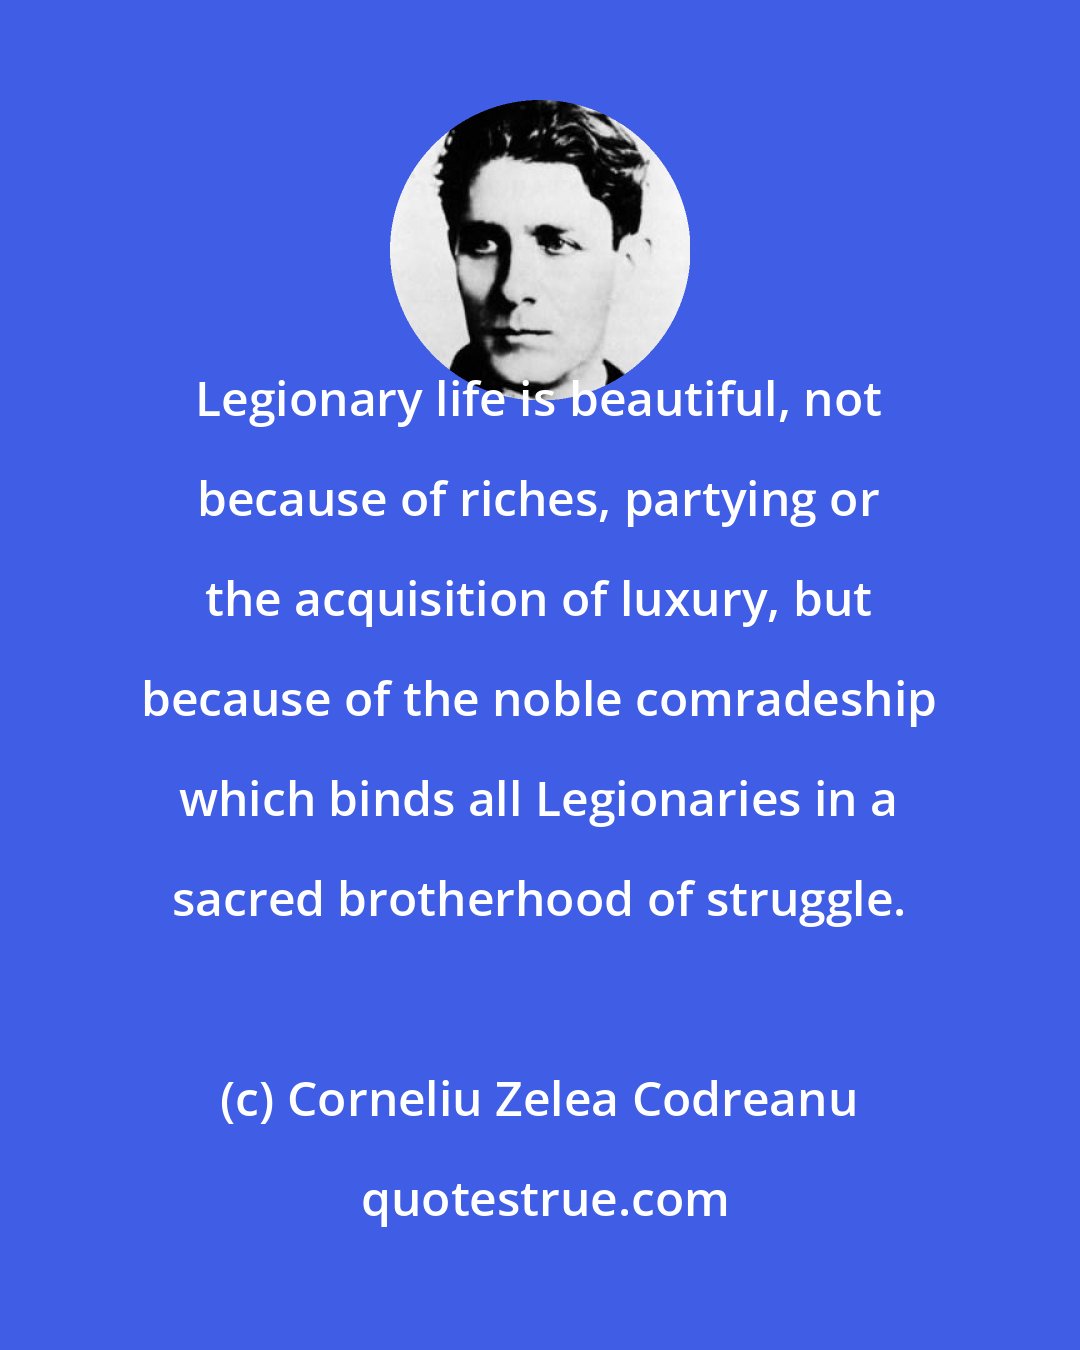 Corneliu Zelea Codreanu: Legionary life is beautiful, not because of riches, partying or the acquisition of luxury, but because of the noble comradeship which binds all Legionaries in a sacred brotherhood of struggle.